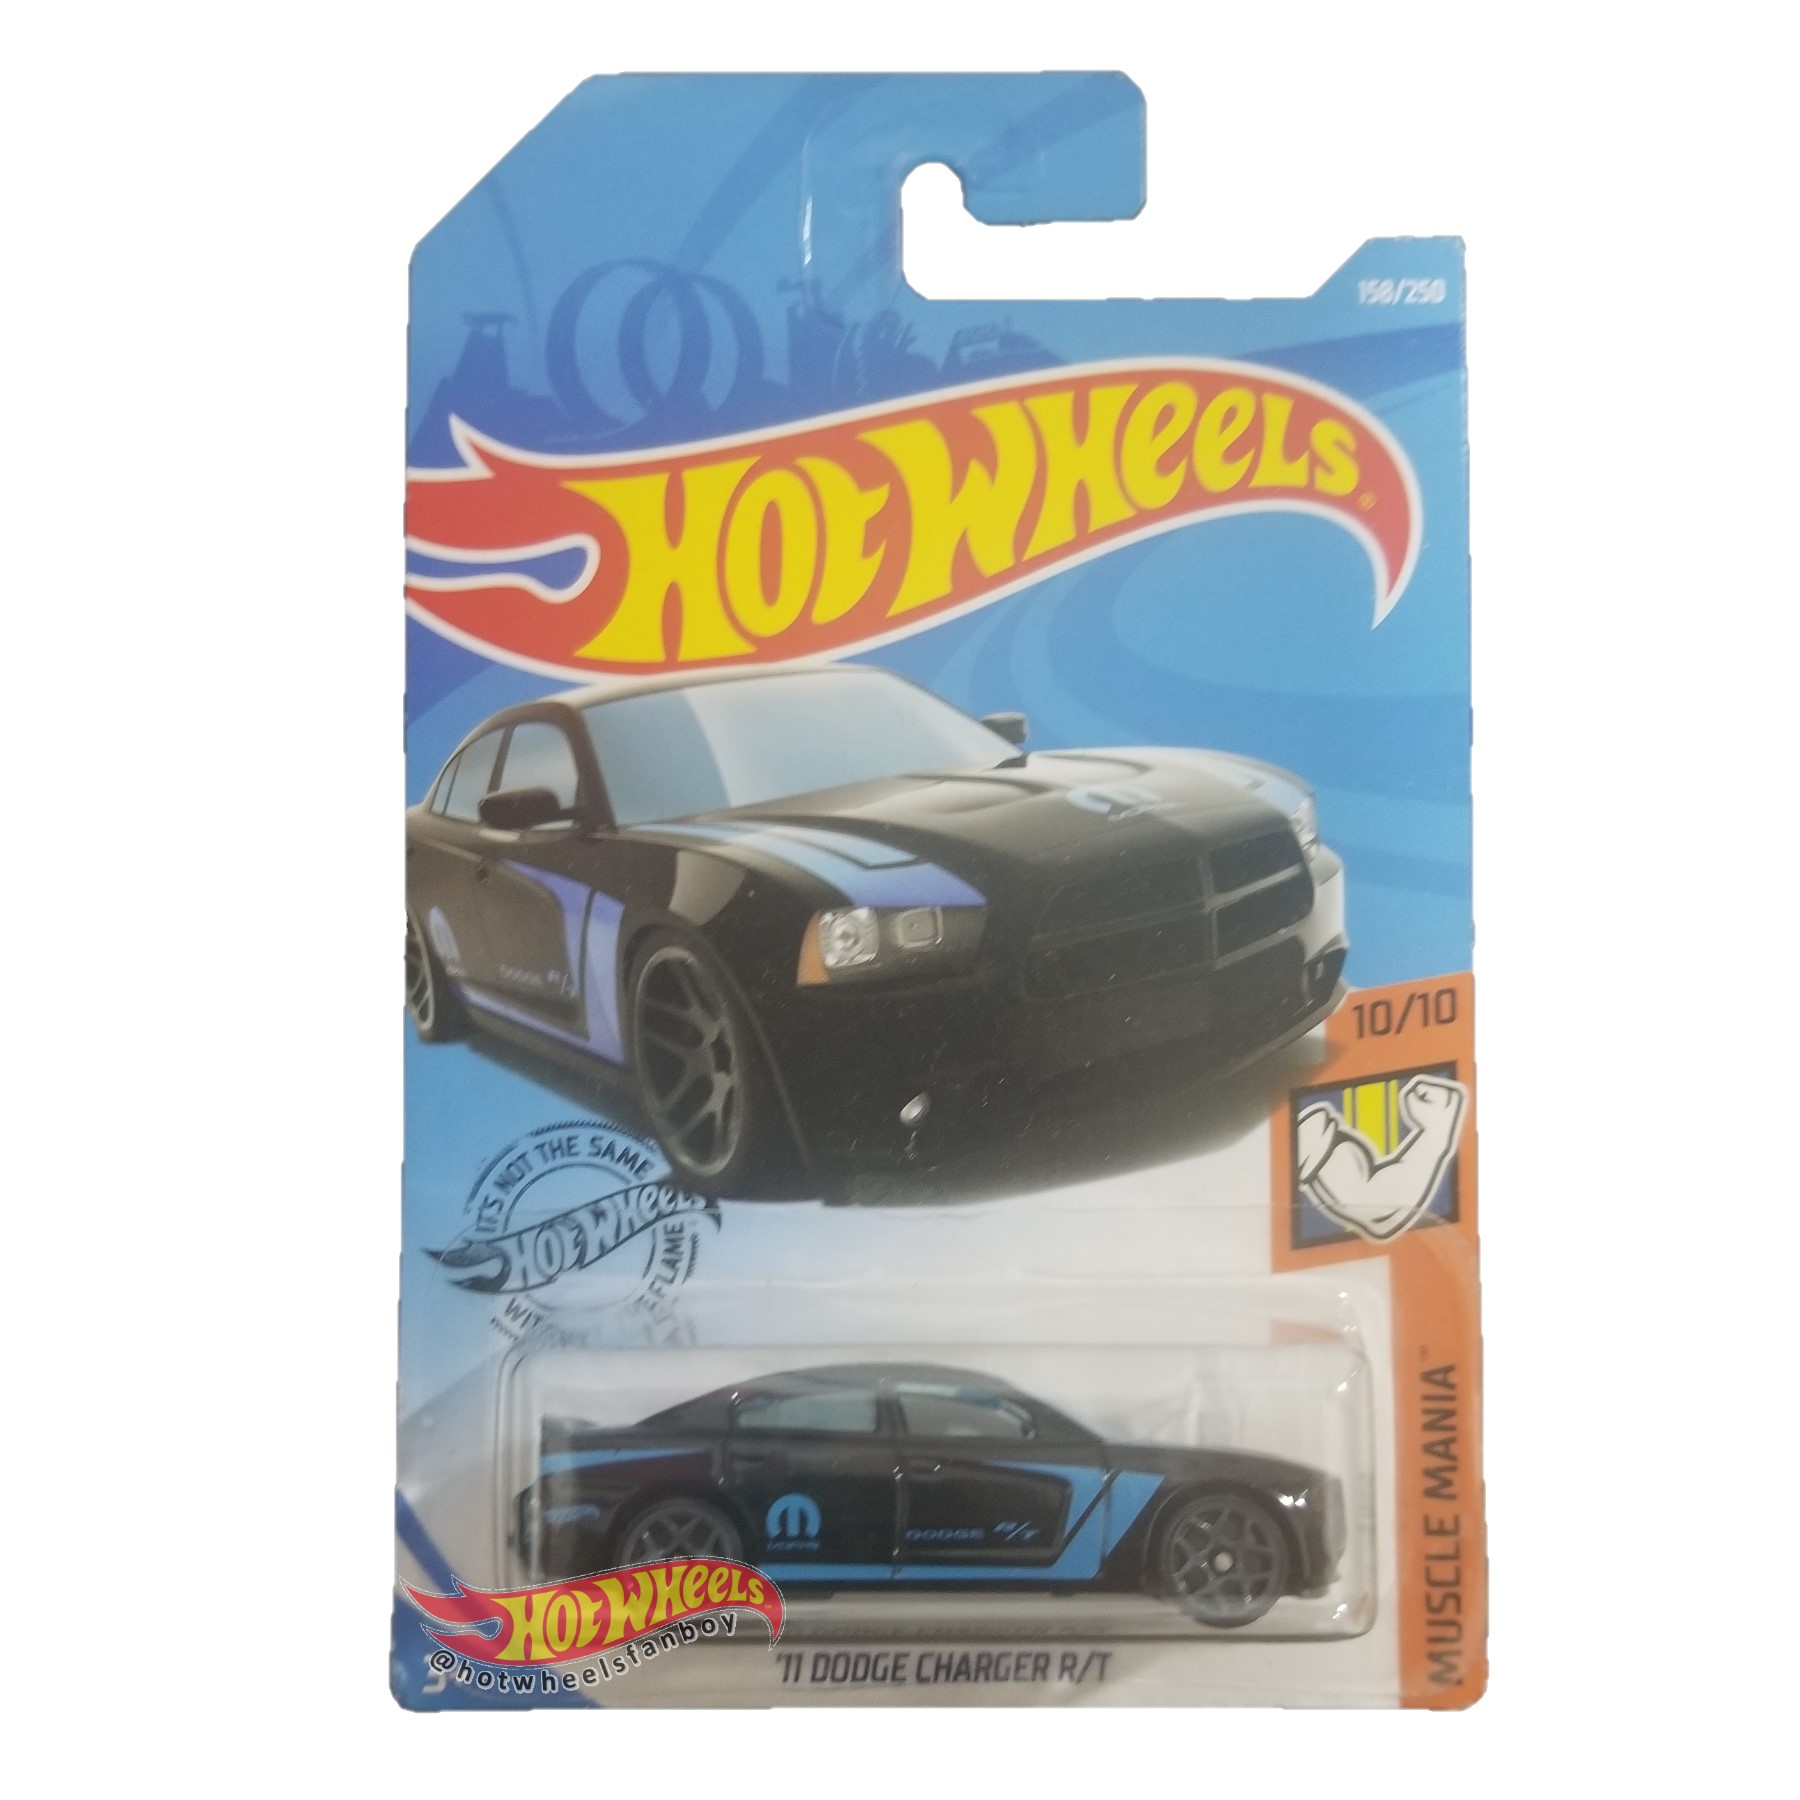 2019 HOT WHEELS #158 MUSCLE MANIA'11 DODGE CHARGER R/T Bleu 